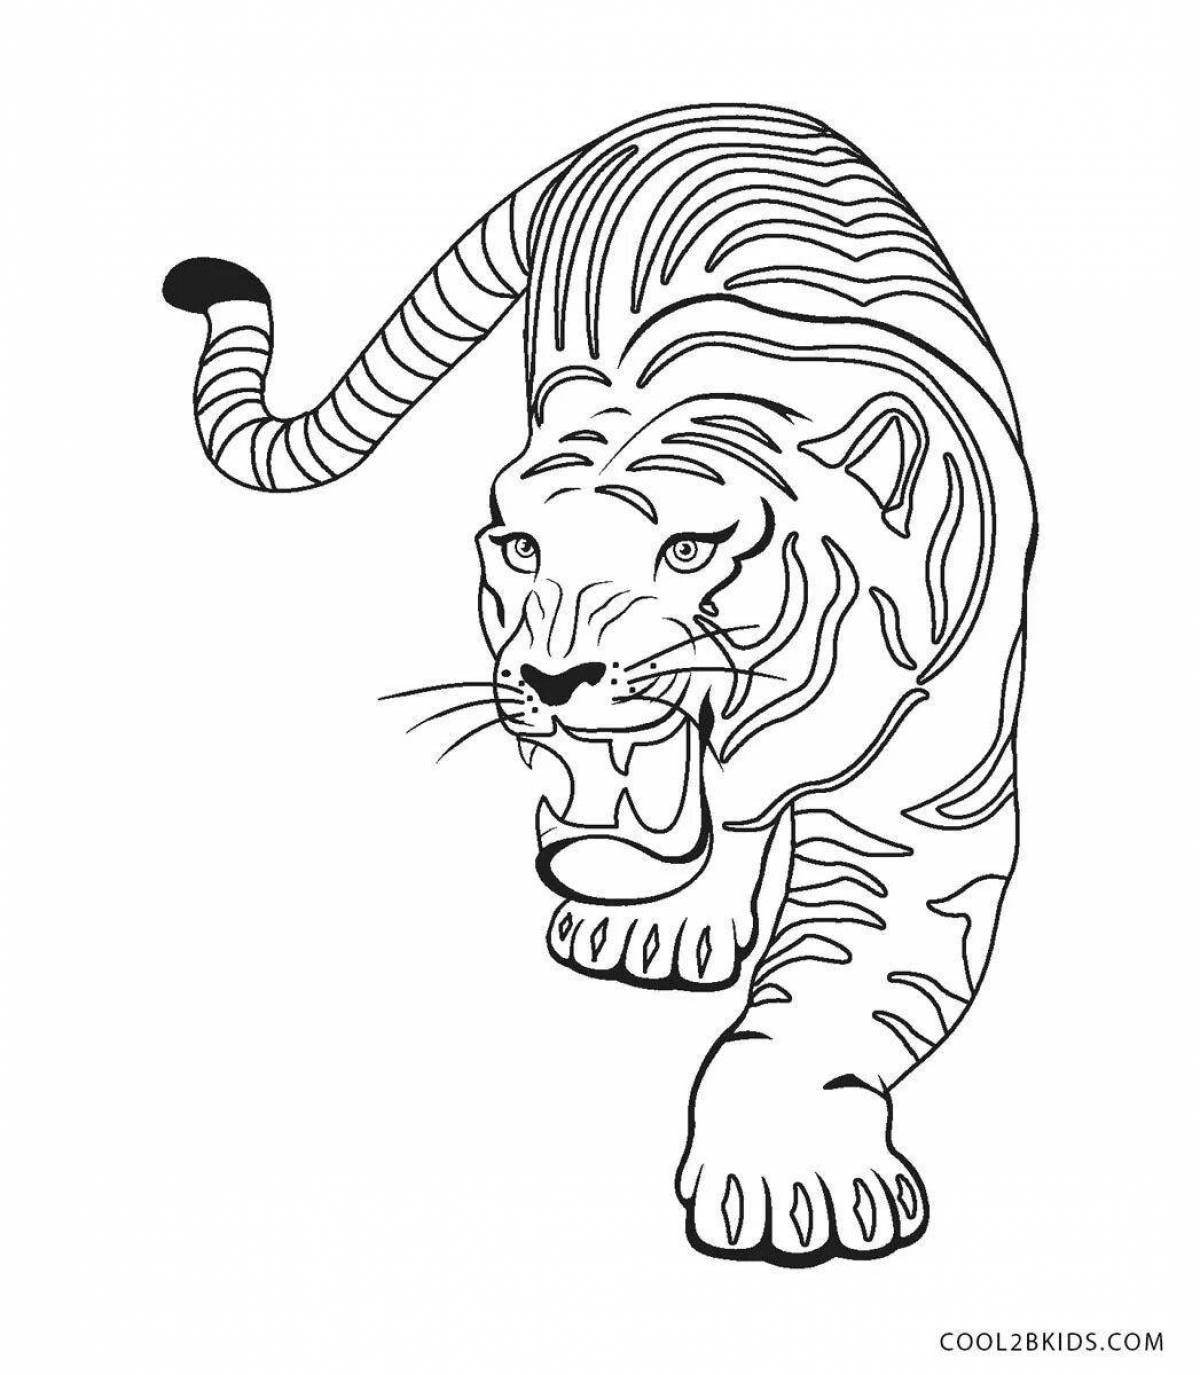 Luminous tiger coloring book for children 6-7 years old